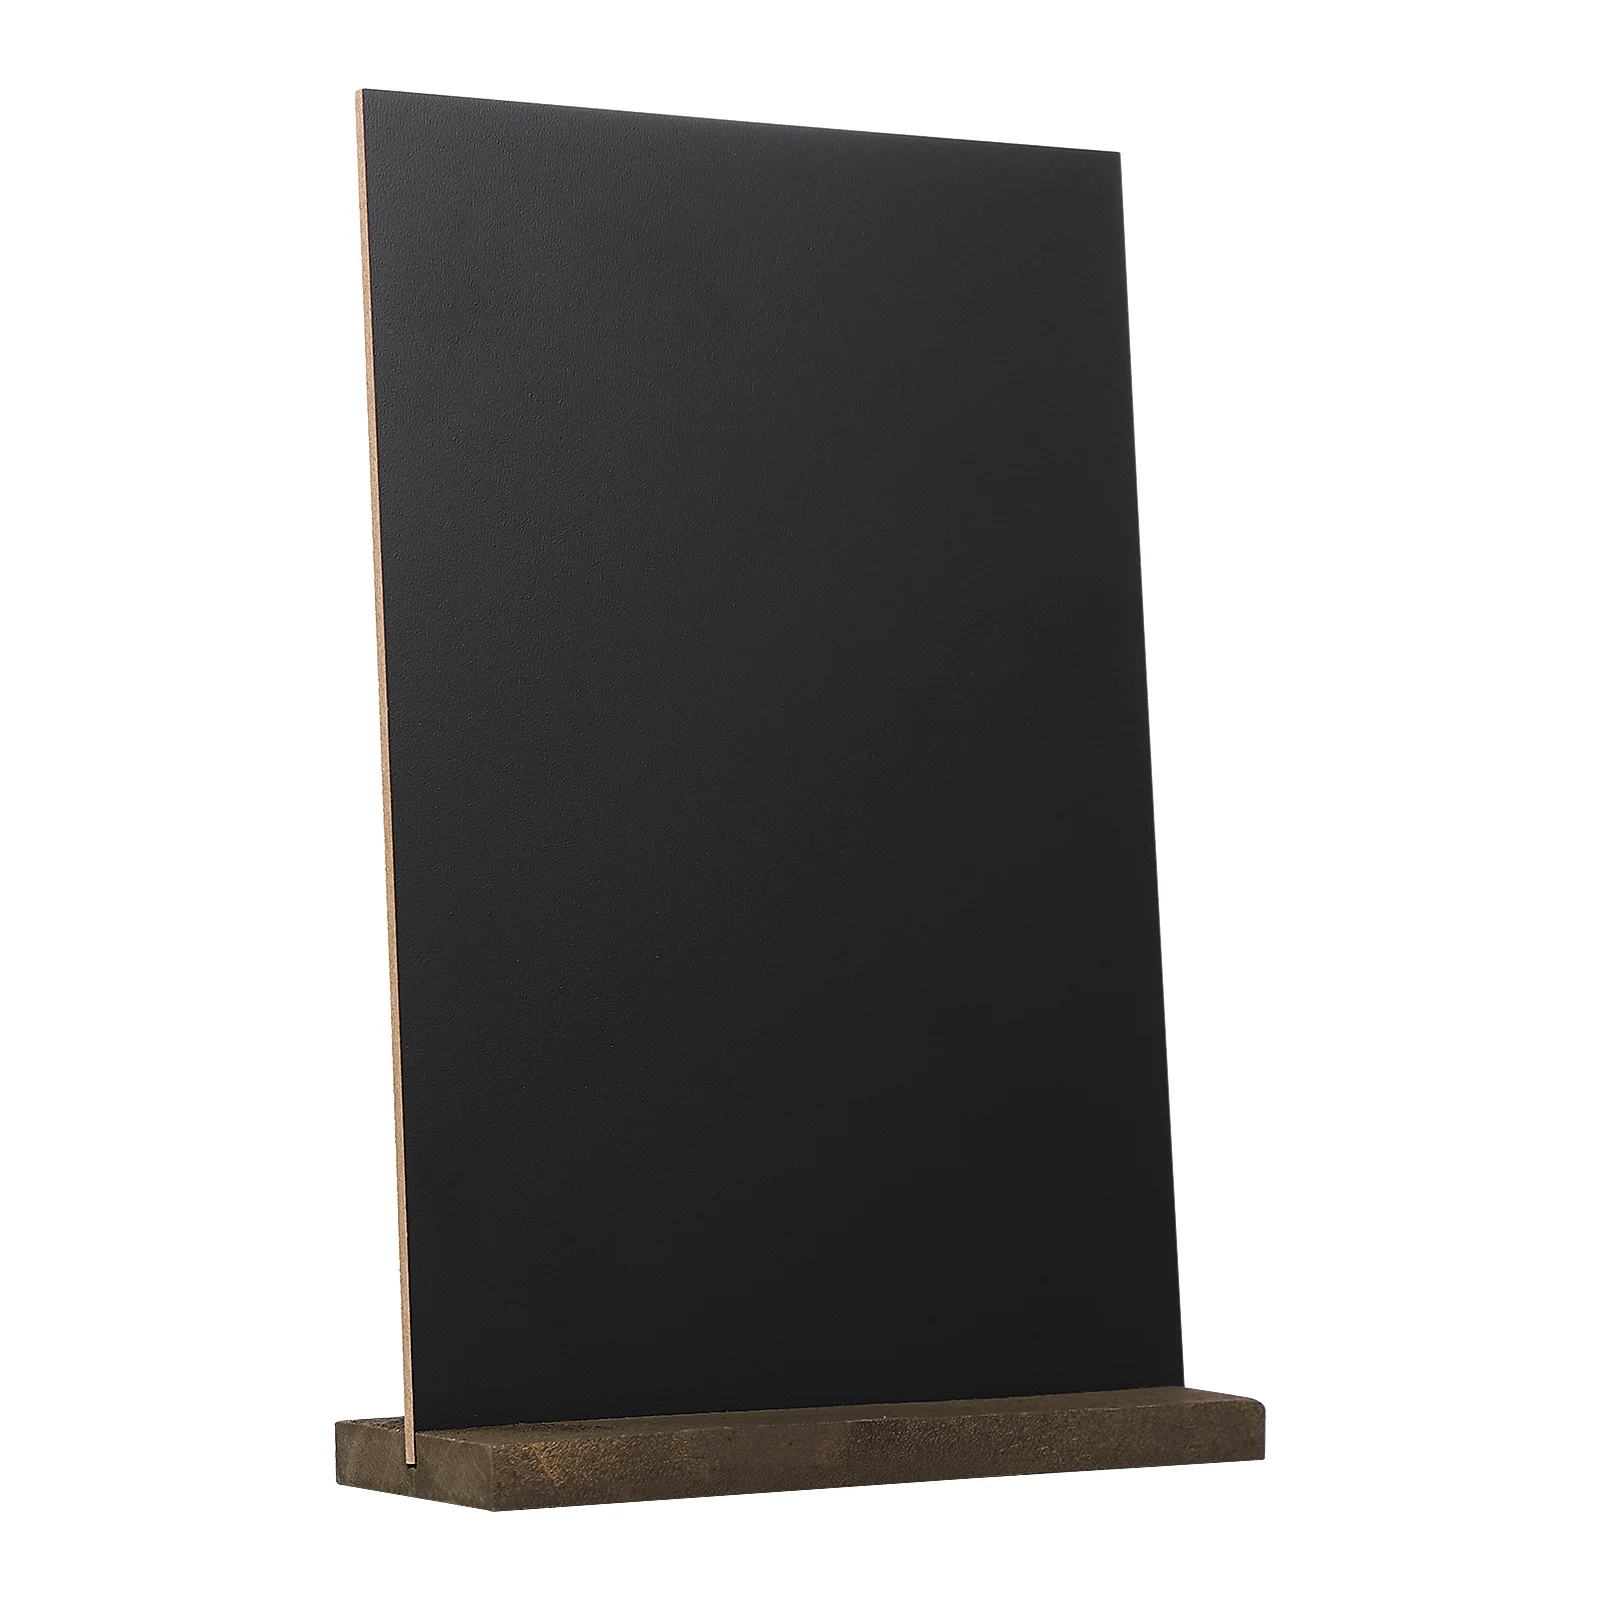 Chalkboard Board Sign Sided Mini Chalk Double Messgae Tabletop Stand Two a4 diy wooden rewritable double sided blackboard chalkboard table card sign stand tabletop price tag hand paint menu display